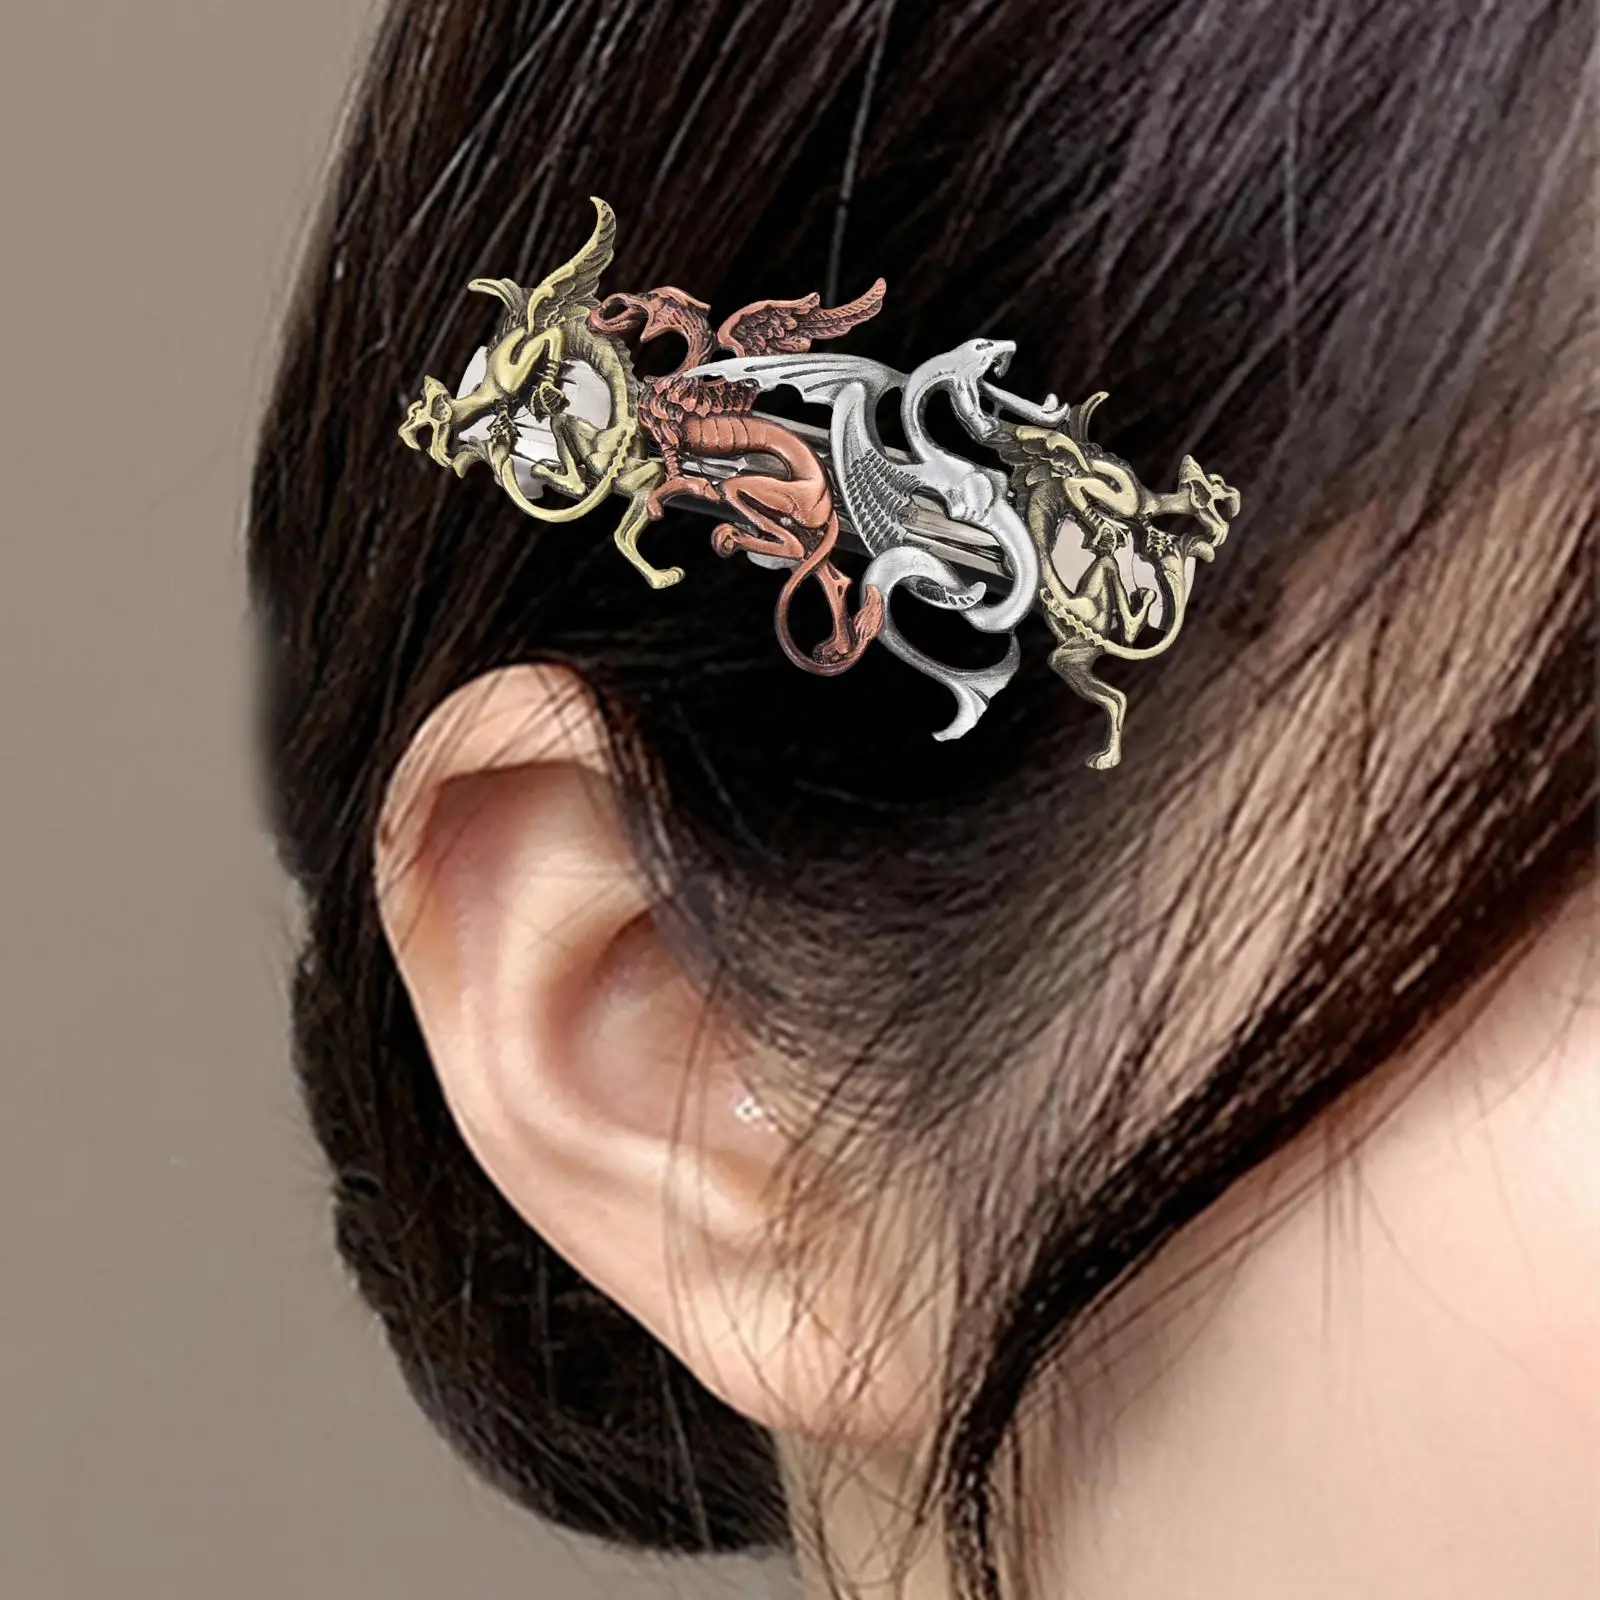 Flying Dragon Hairpin Metal Barrettes Headwear Hair Jewelry Retro Steampunk Hair Clip Gift for Makeup Prom Party Girls